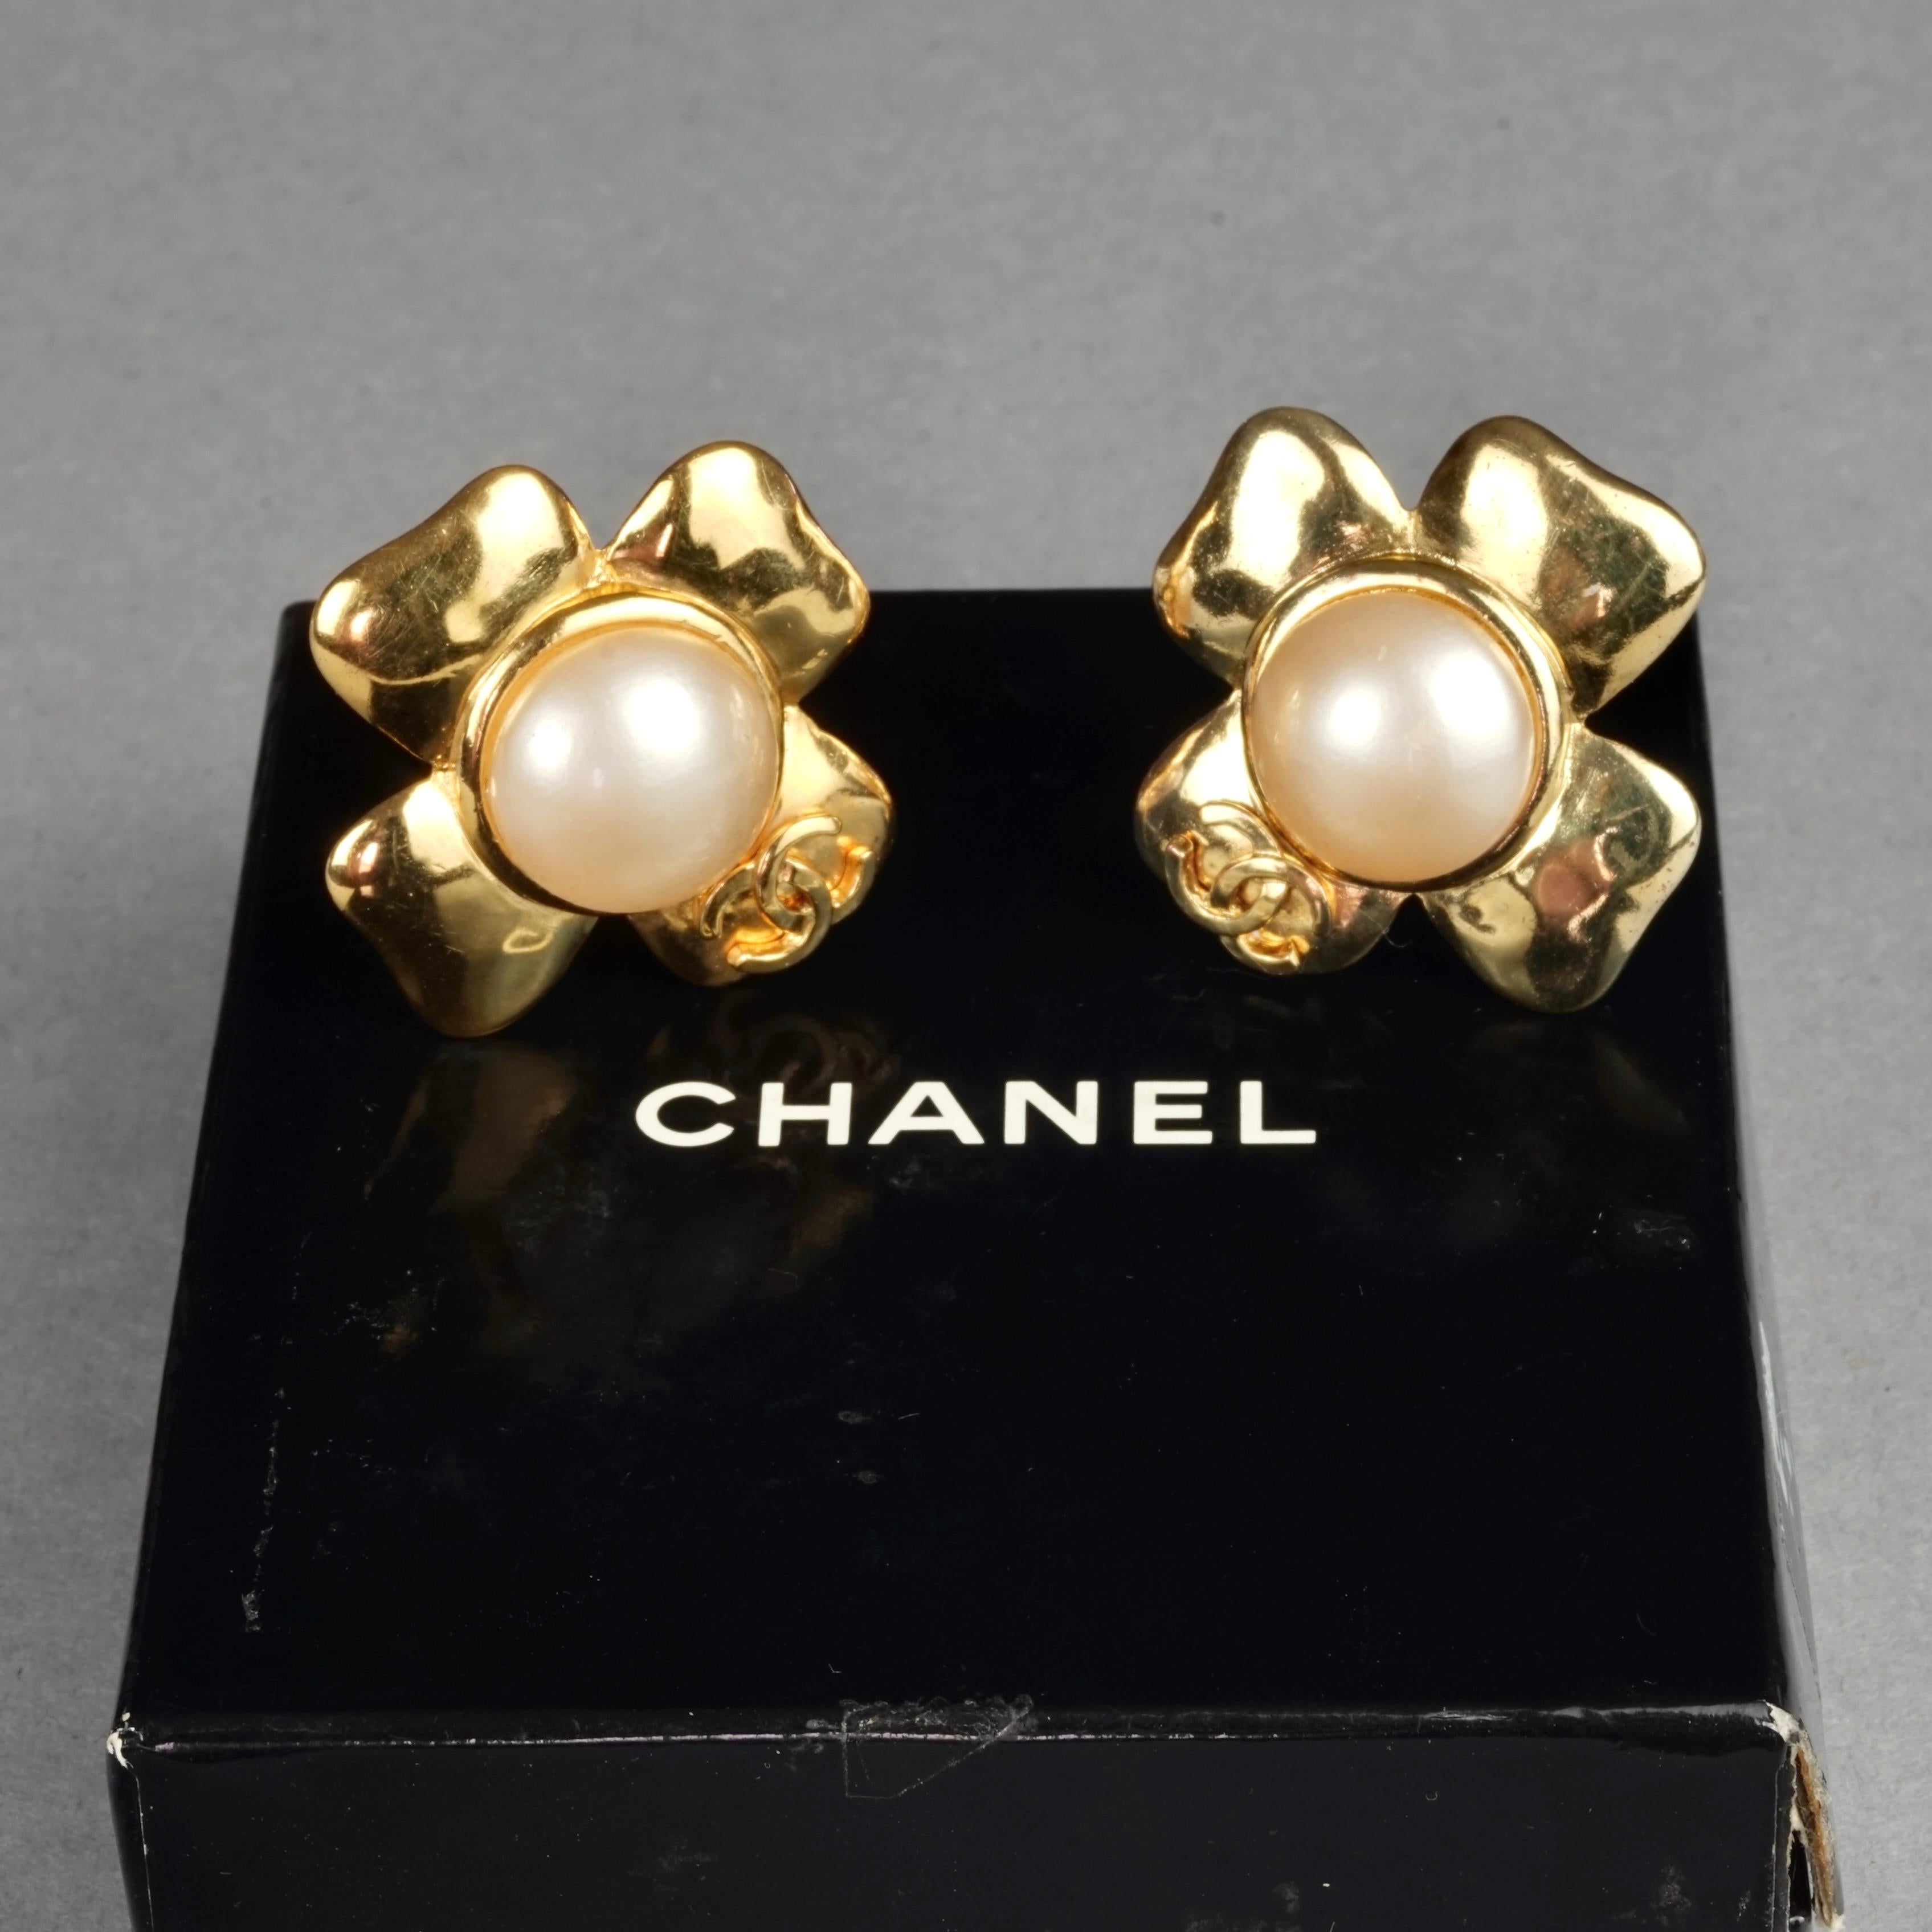 Vintage 1997 CHANEL Logo Cross Pearl Earrings In Good Condition For Sale In Kingersheim, Alsace